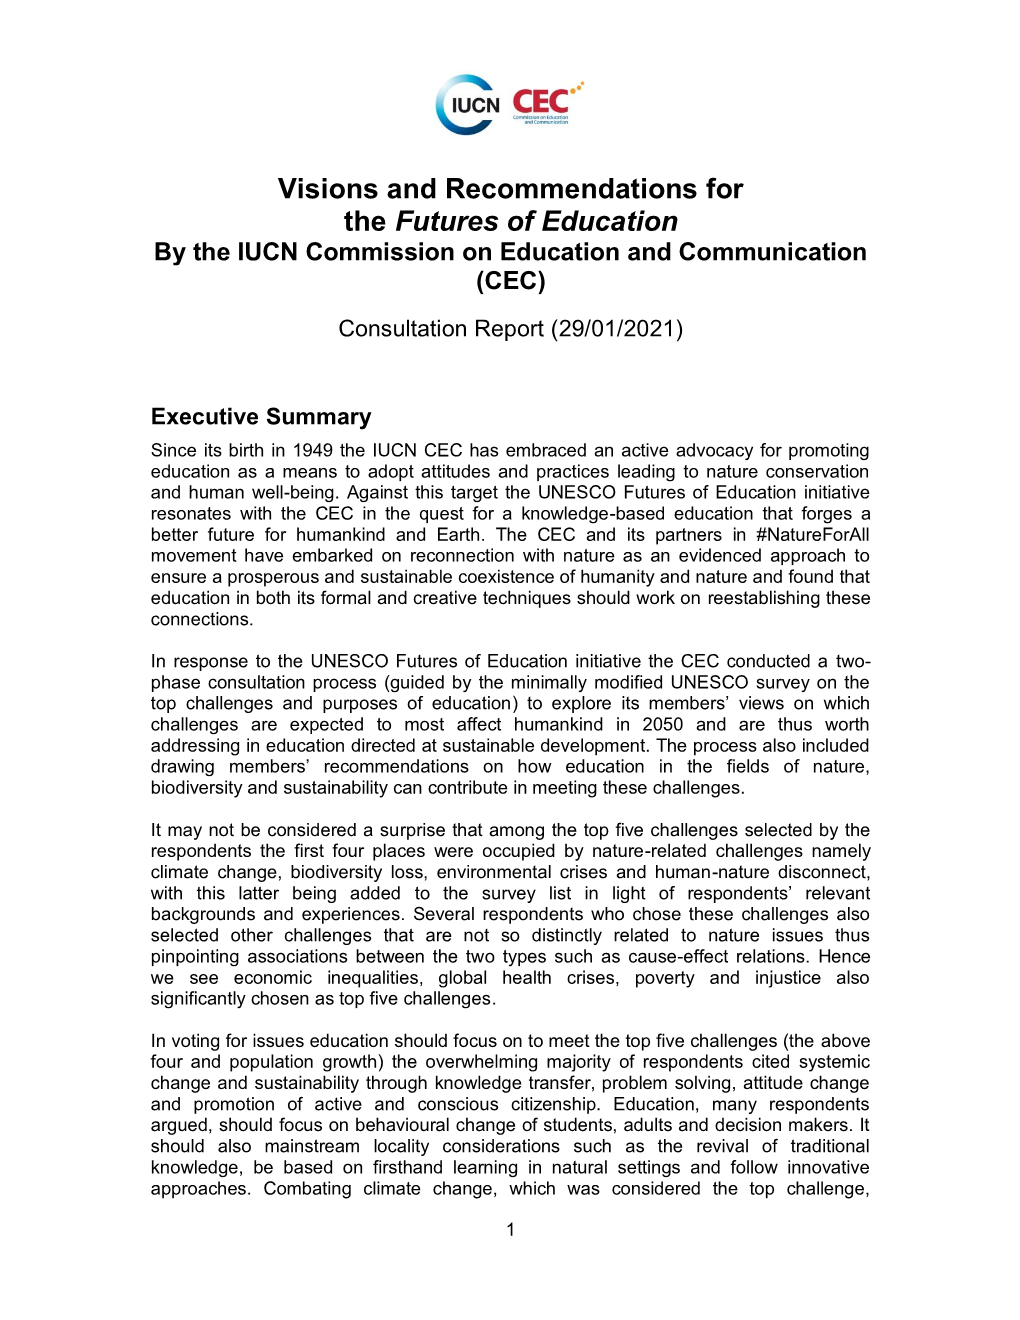 Visions and Recommendations for the Futures of Education by the IUCN Commission on Education and Communication (CEC)